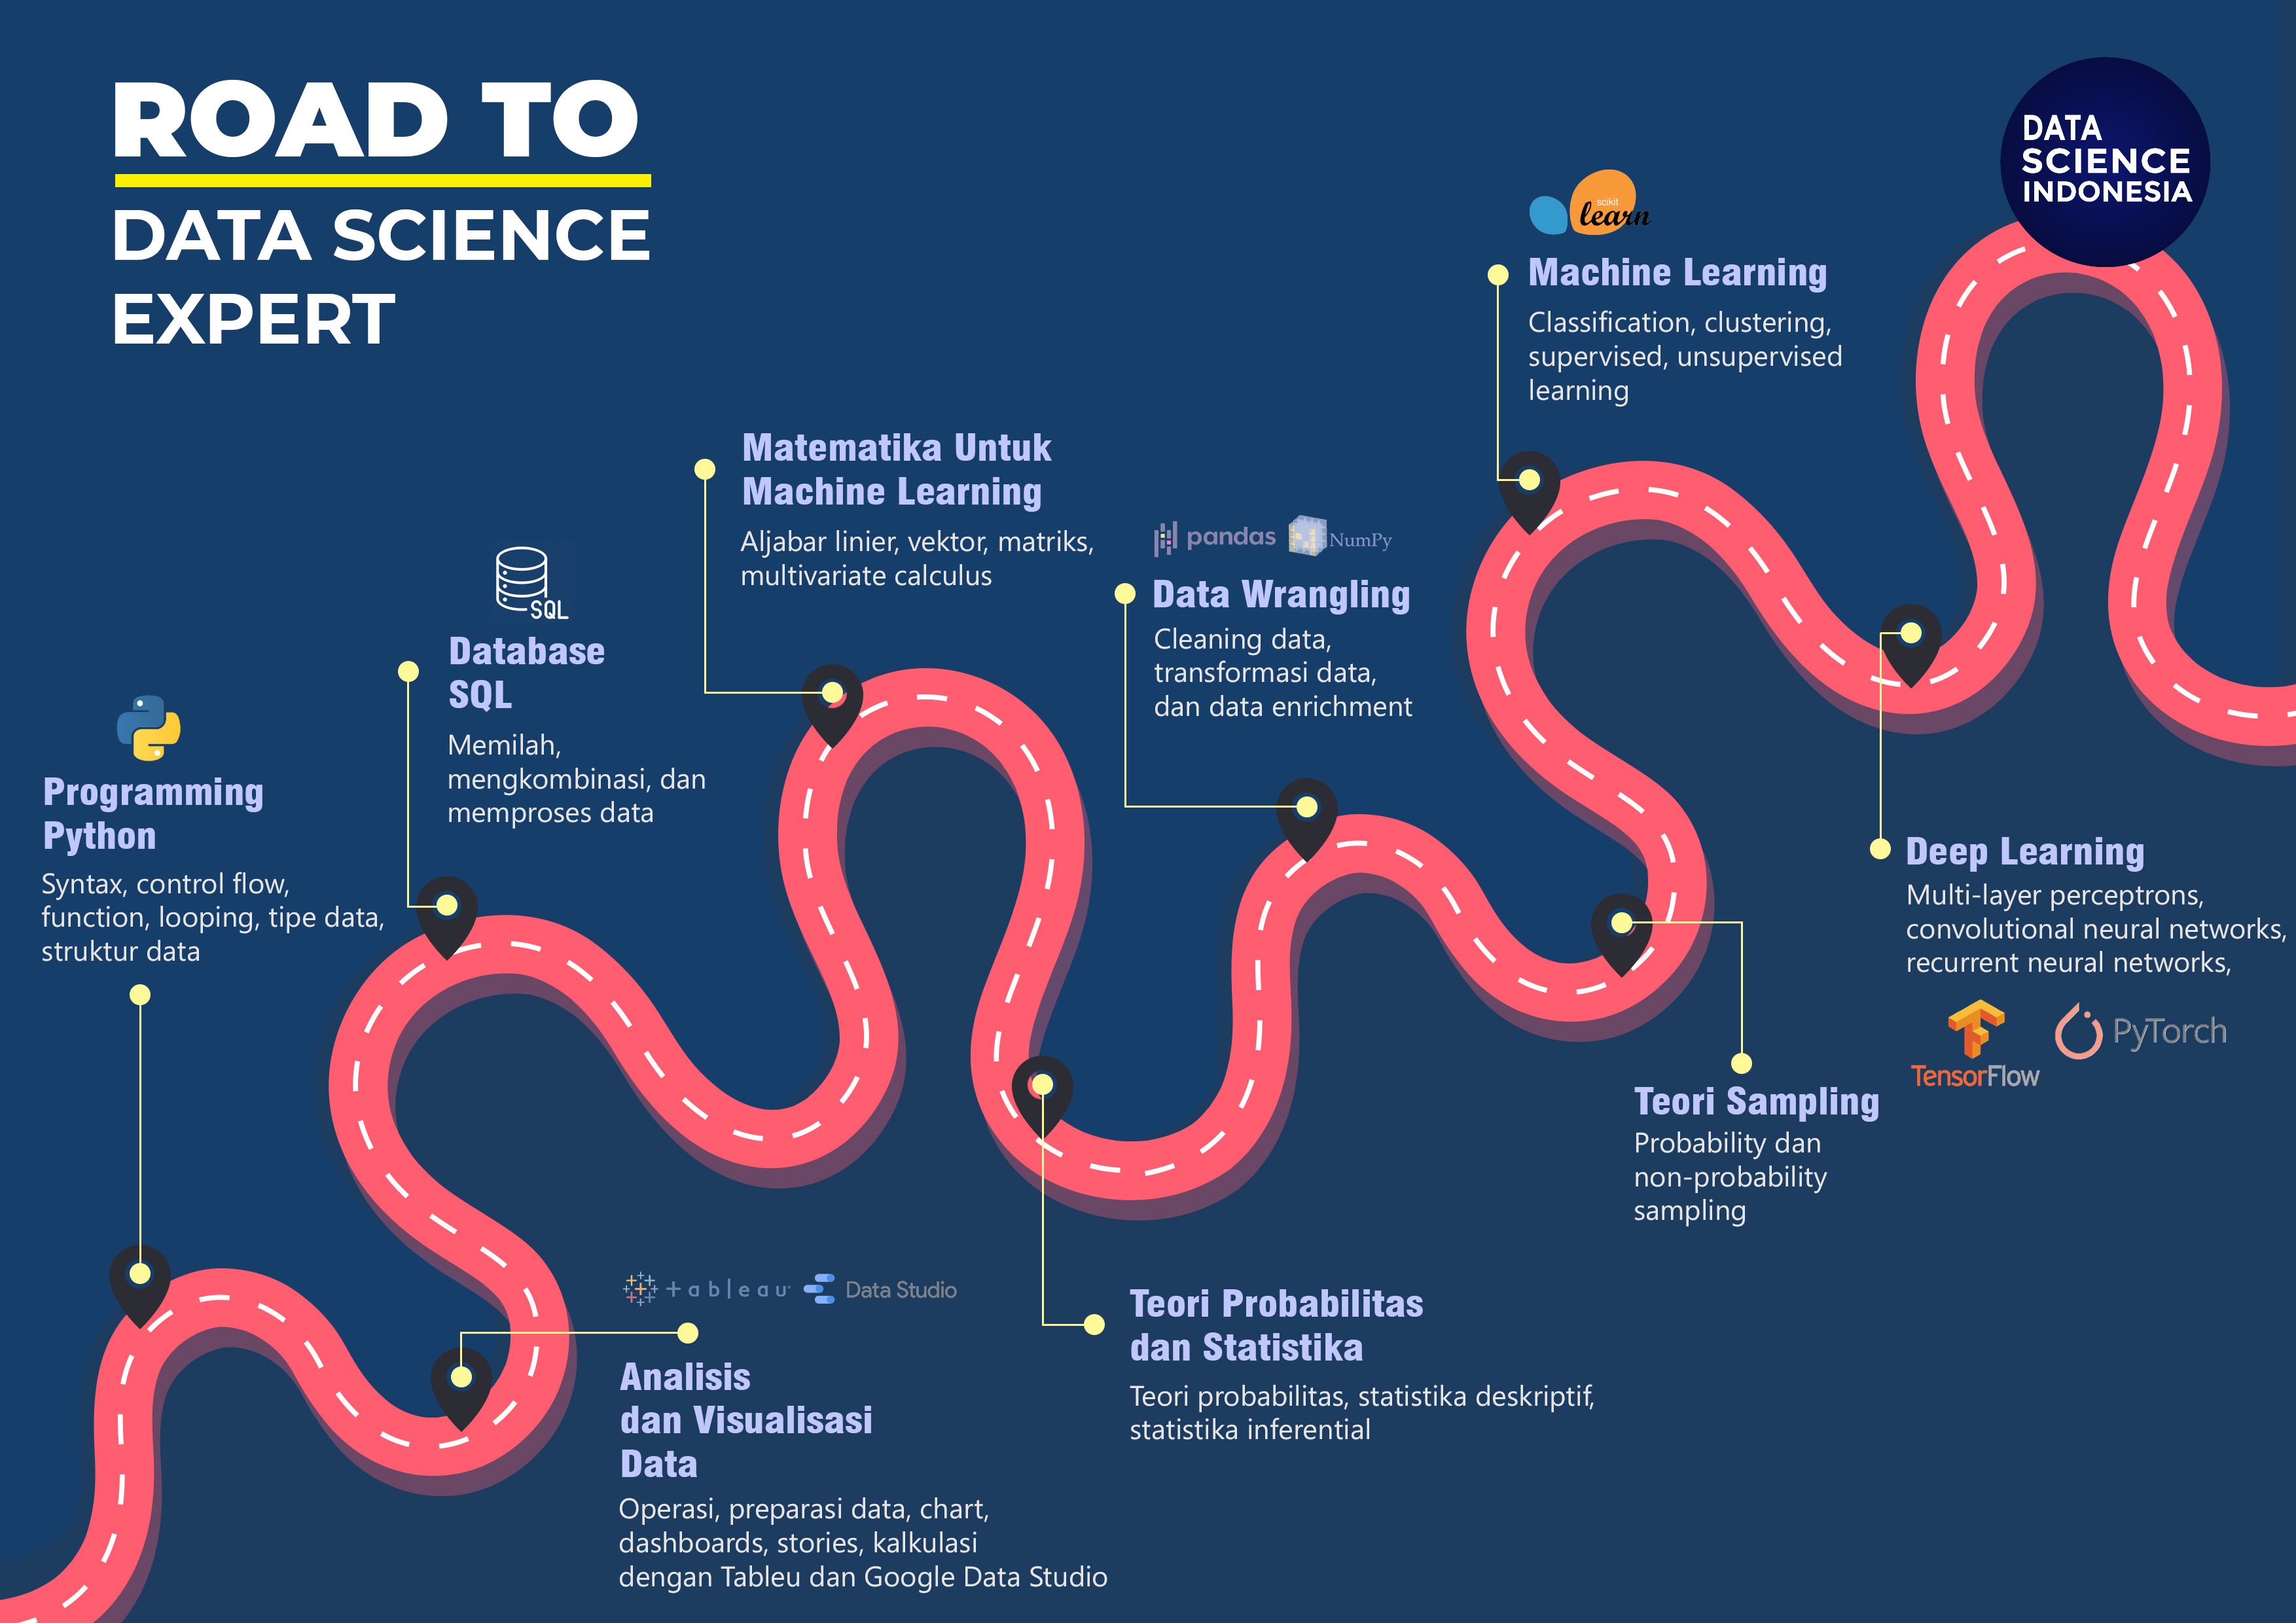 Roadmap Data Science by Data Science Indonesia